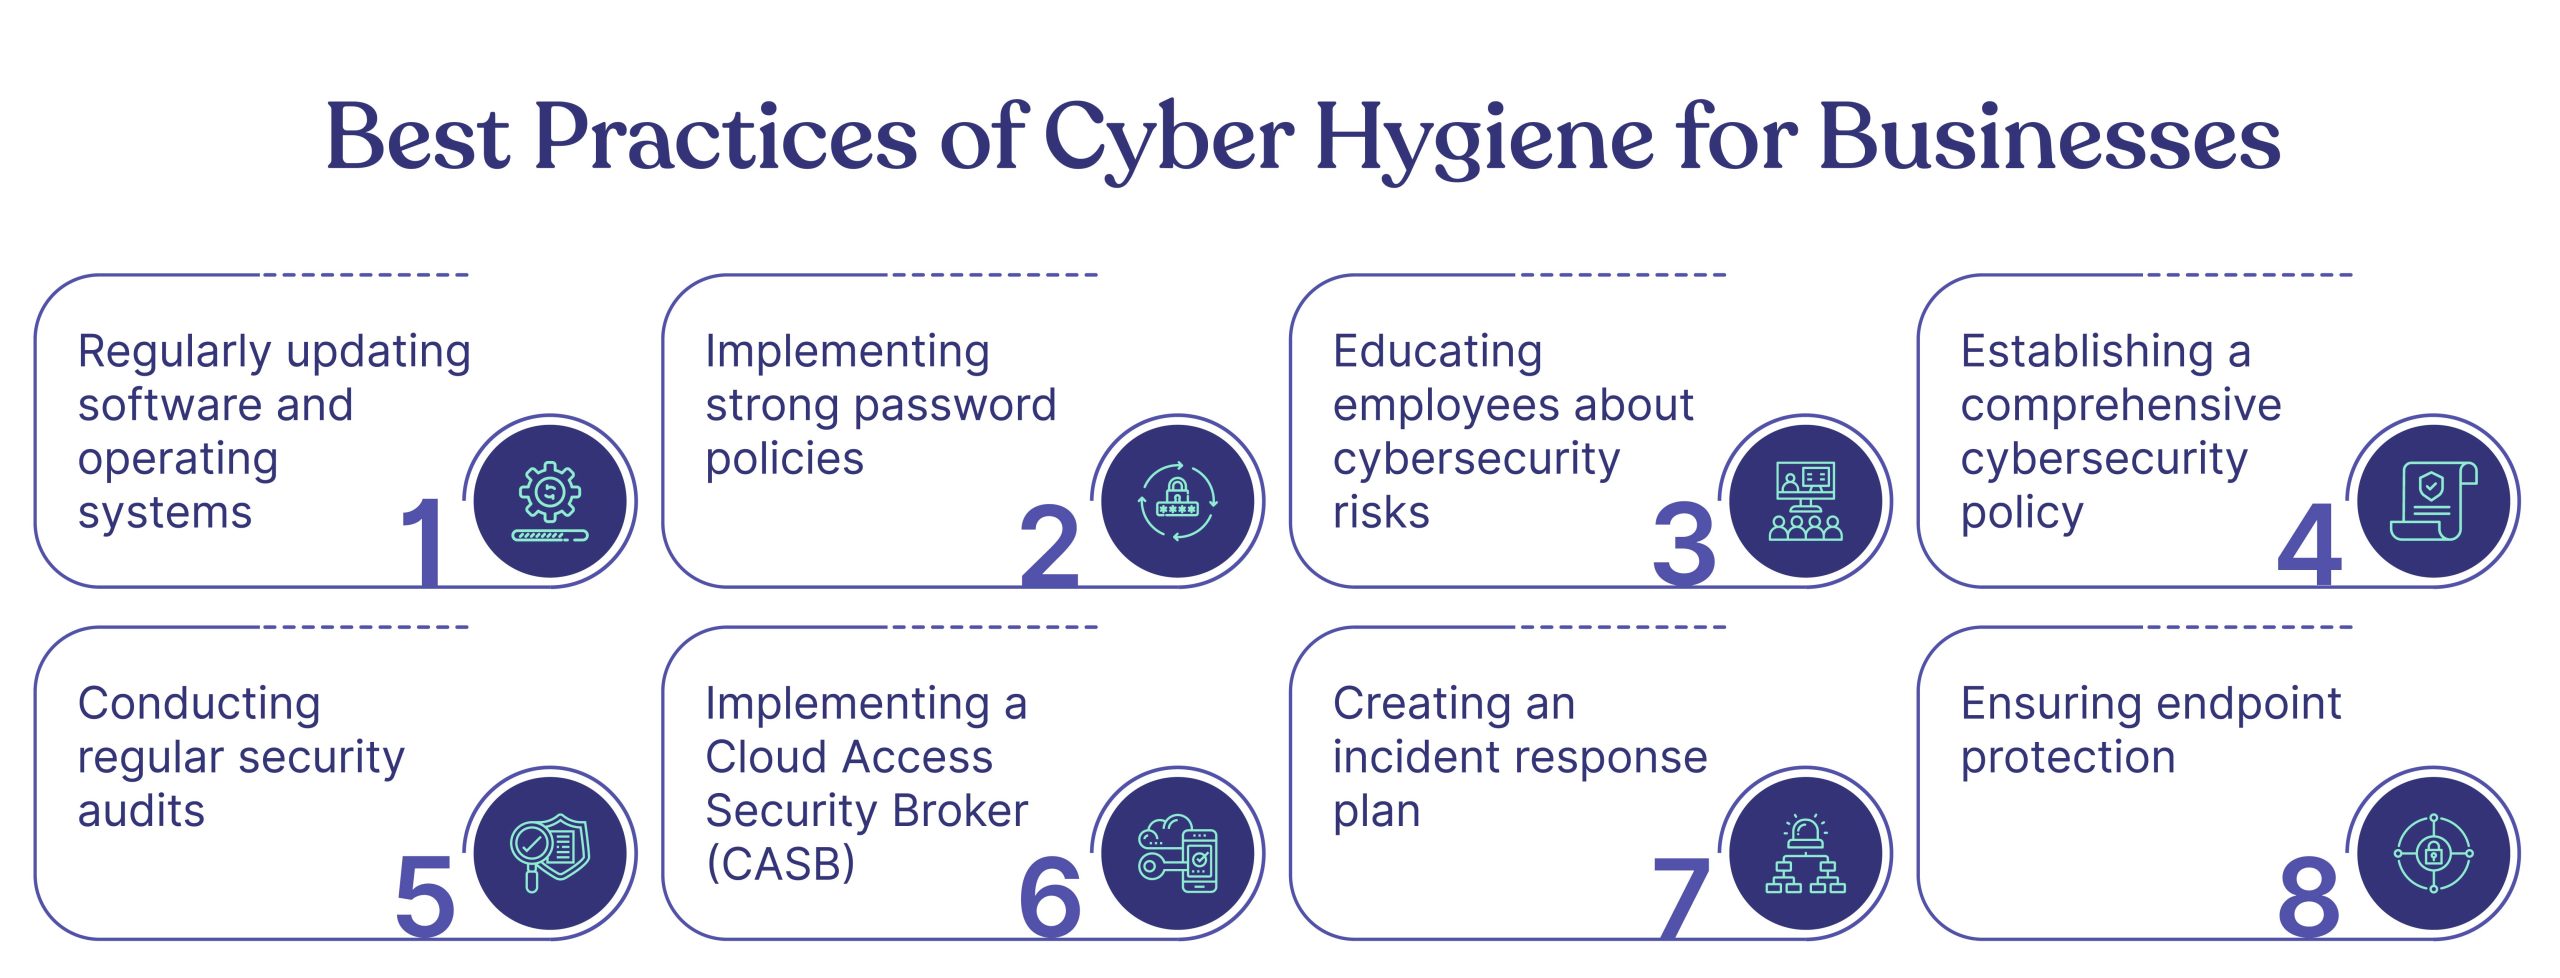 Best Practices of Cyber Hygiene for Businesses 